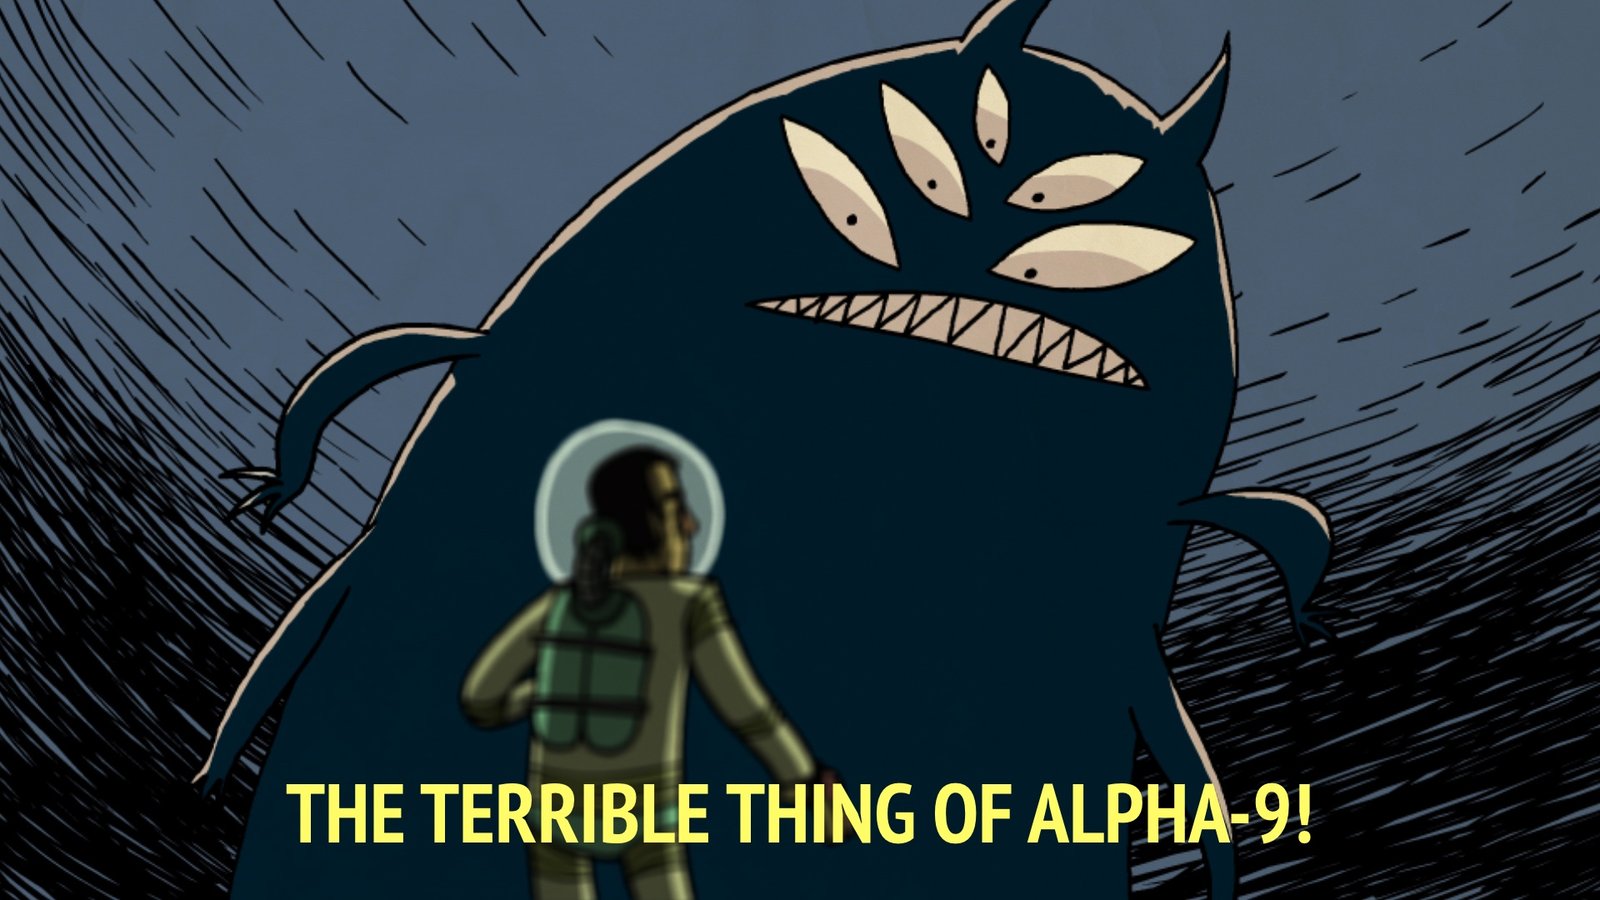 The Terrible Thing of Alpha-9!